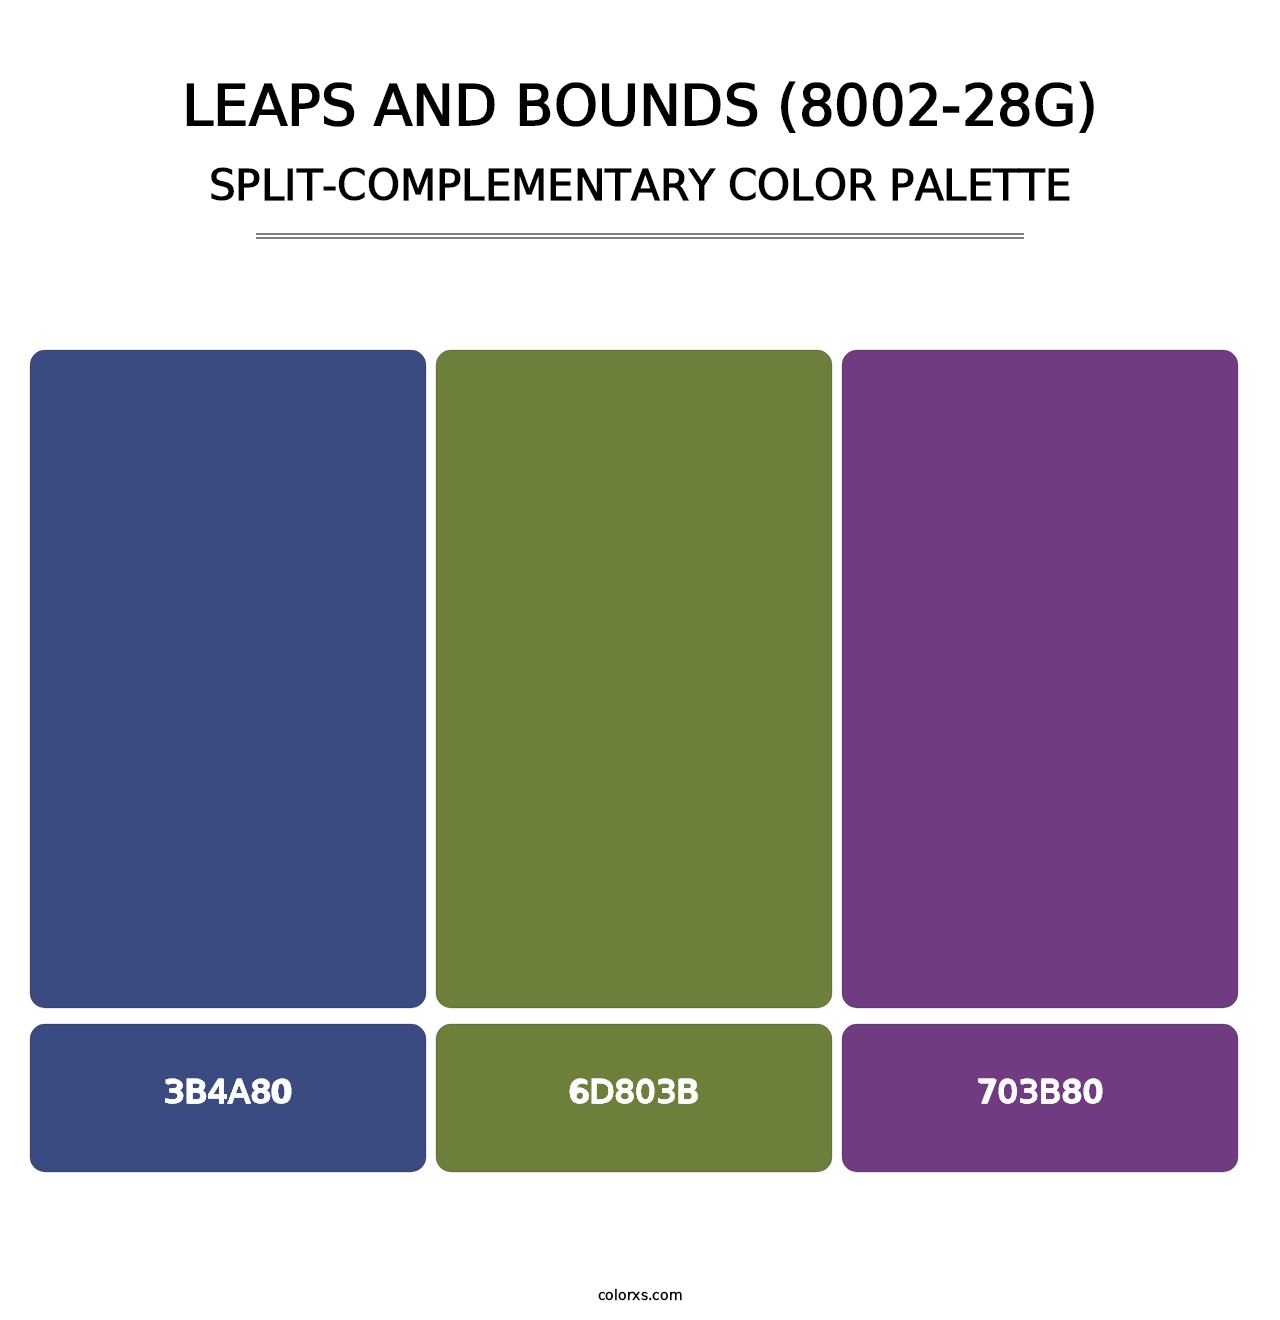 Leaps and Bounds (8002-28G) - Split-Complementary Color Palette